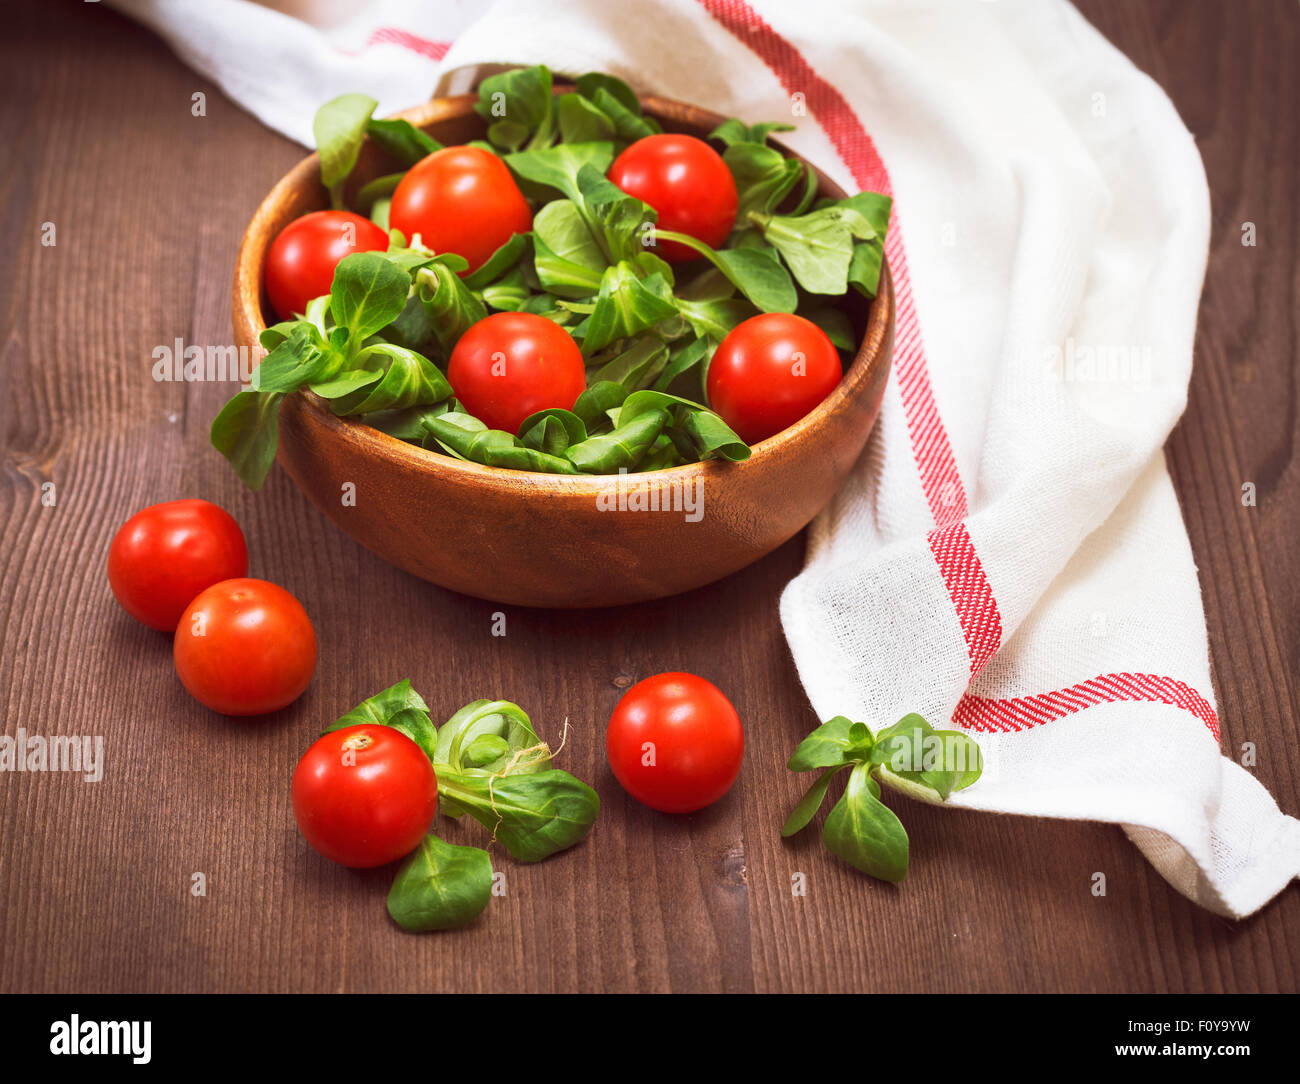 Summer salad with  lamb's lettuce and cherry tomatoes on wooden background Stock Photo